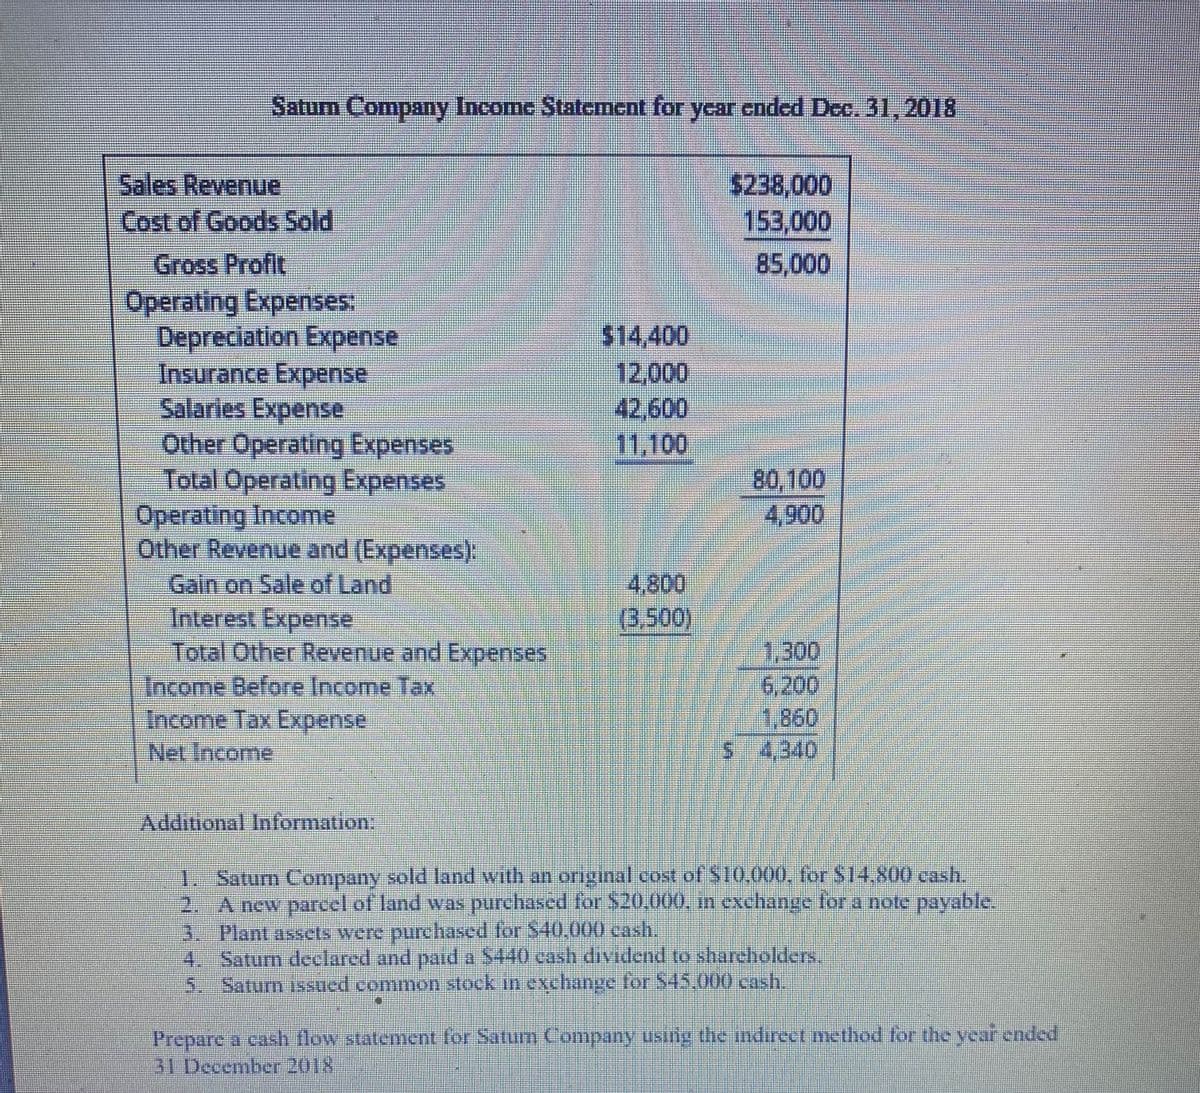 Saturn Company Income Statement for year cnded Dec. 31,2018
Sales Revenue
Cost of Goods Sold
$238,000
153,000
Gross Profit
Operating Expenses:
Depreciation Expense
Insurance Expense
Salaries Expense
Other Operating Expenses
Total Operating Expenses
Operating Income
Other Revenue and (Expenses):
Gain on Sale of Land
Interest Expense
Total Other Revenue and Expenses
Income Before Income Tax
Income Tax Expense
Net Income
85,000
$14,400
12,000
42,600
11,100
80,100
4,900
4,800
(3,500)
1,300
6,200
1,860
S 4,340
Additional Information:
1. Saturn Company sold land with an original cost of $10.000, for $14,800 cash.
2. A new parcel of land was purchased for $20,000. in exchange for a note payable.
3. Plant assets were purehased for $40.000 cash.
4. Saturn declared and paid a $440 cash dividend to shareholders.
5. Saturn issued common stock in exchange for S45.000 cash.
Prepare a cash flow statement for Saturm Company using the indireet method for the year ended
31 December 2018
